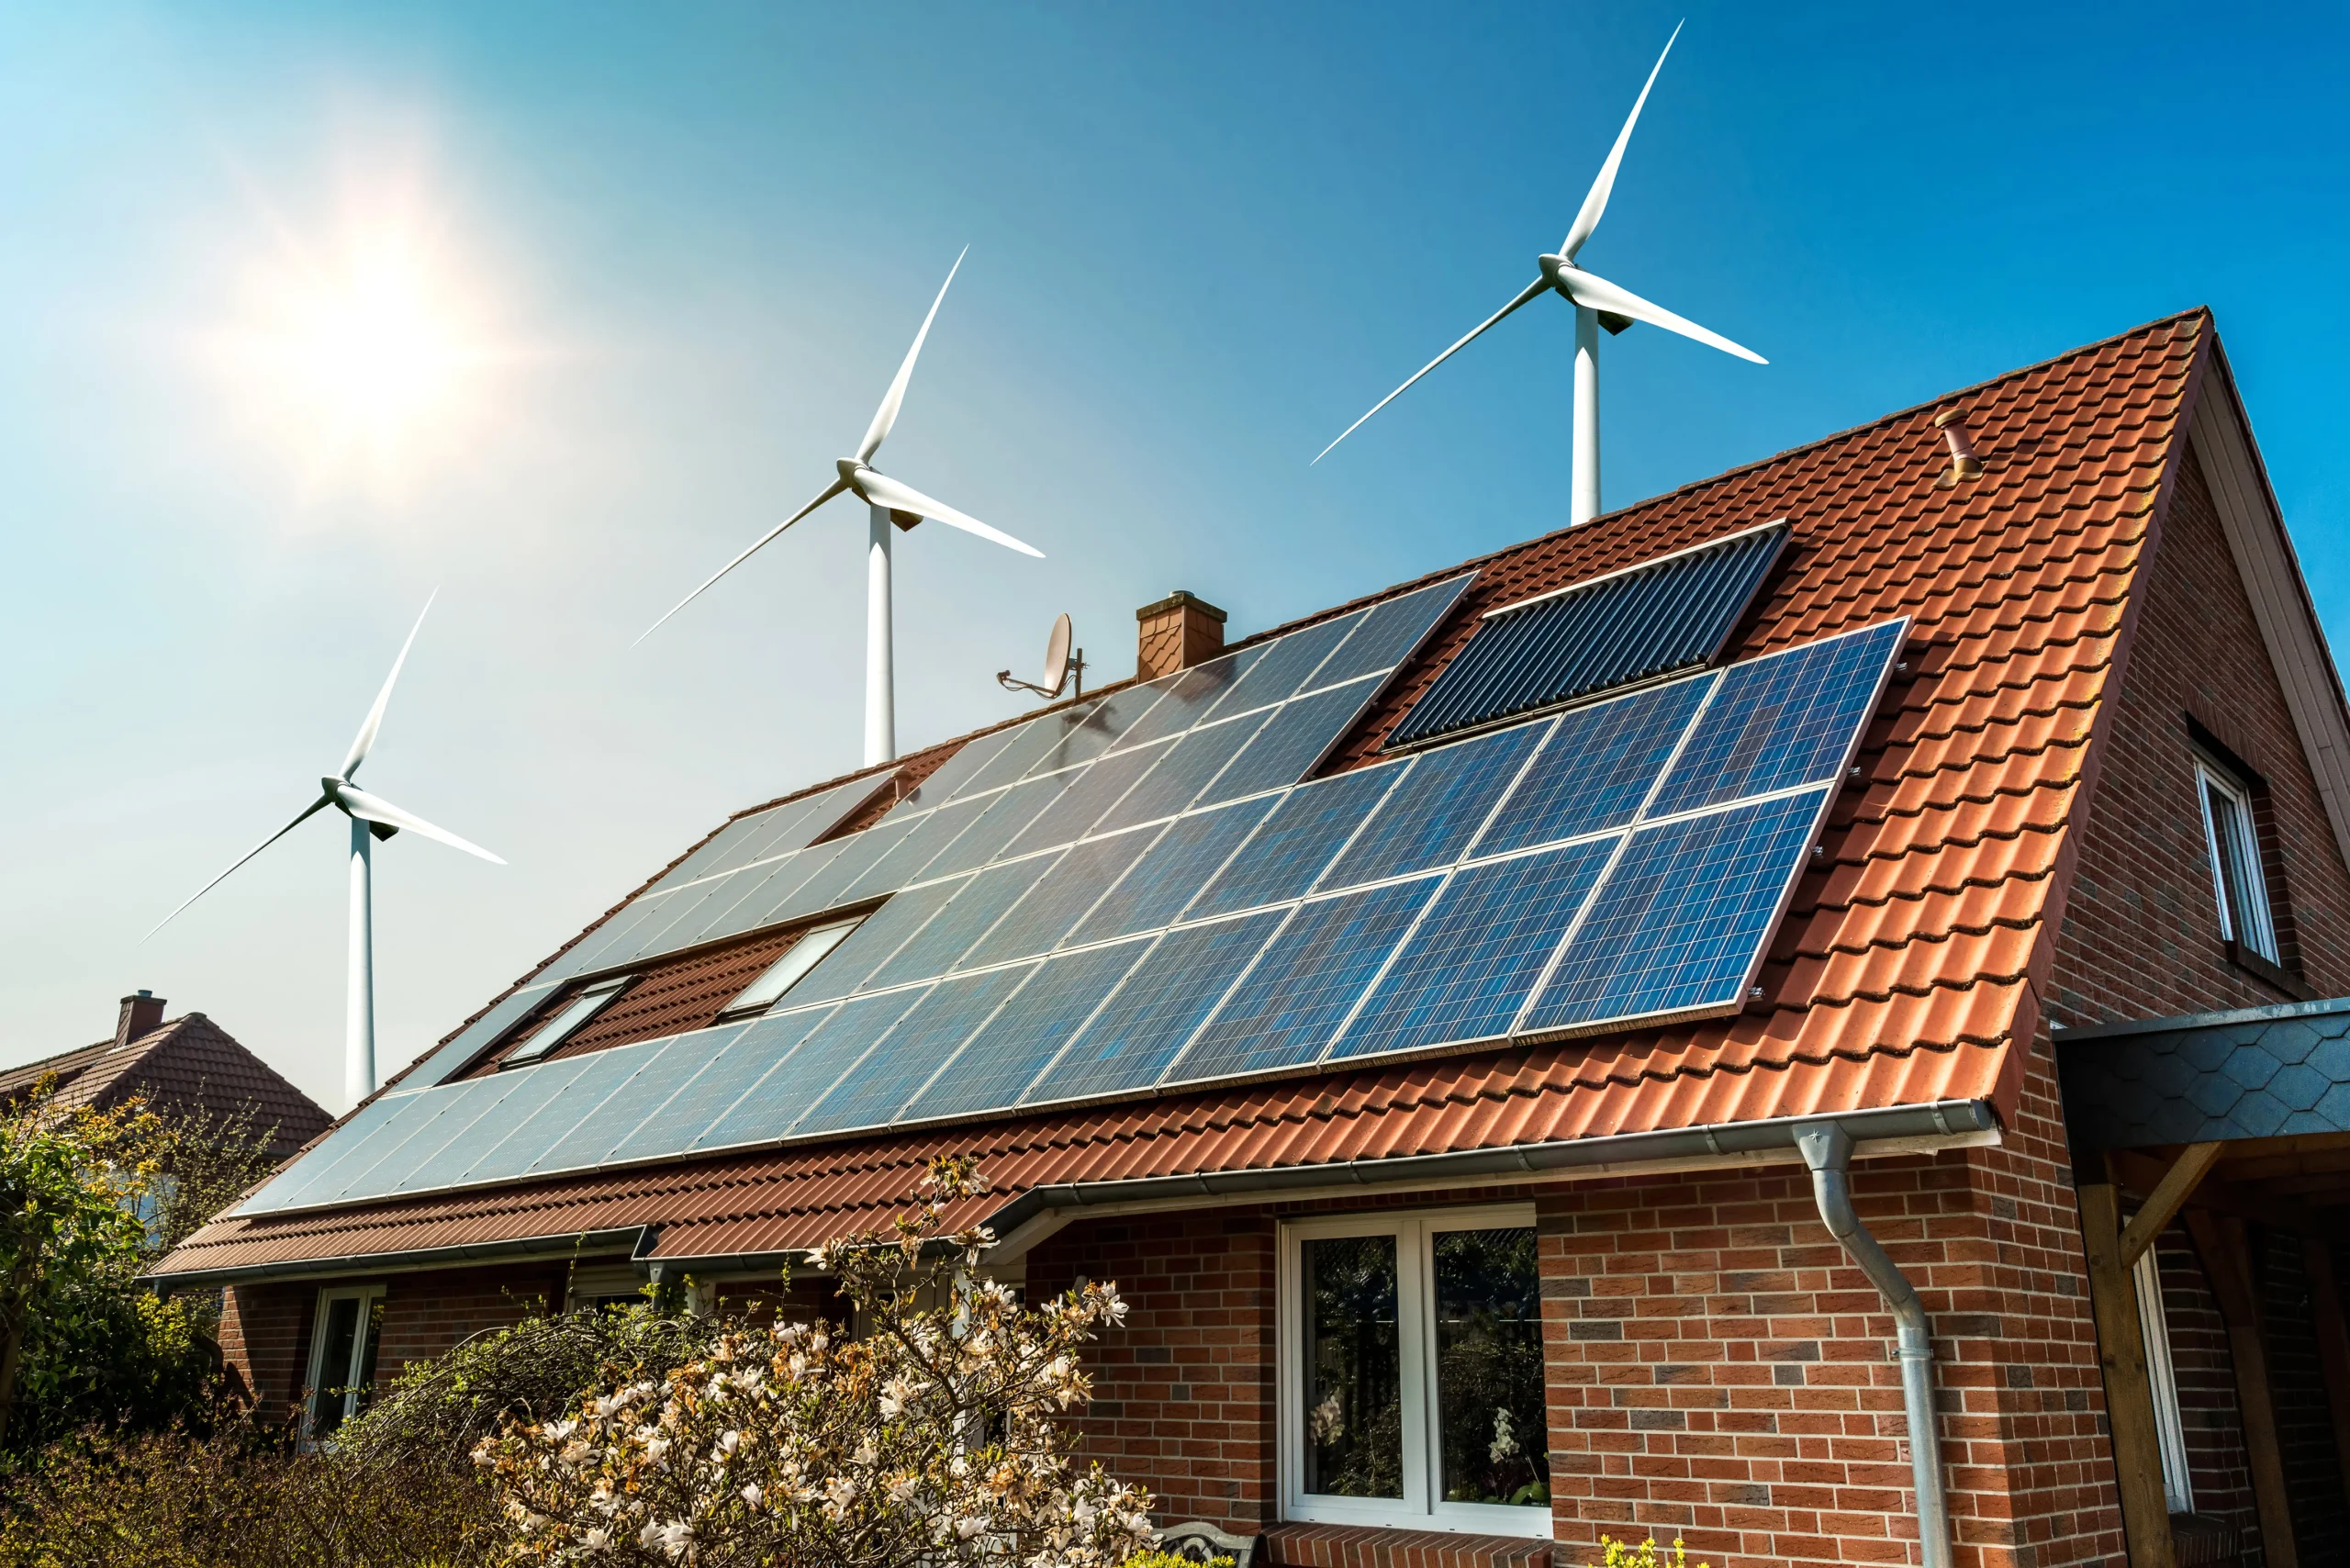 home energy alternatives solar power - What is the best energy source for homes